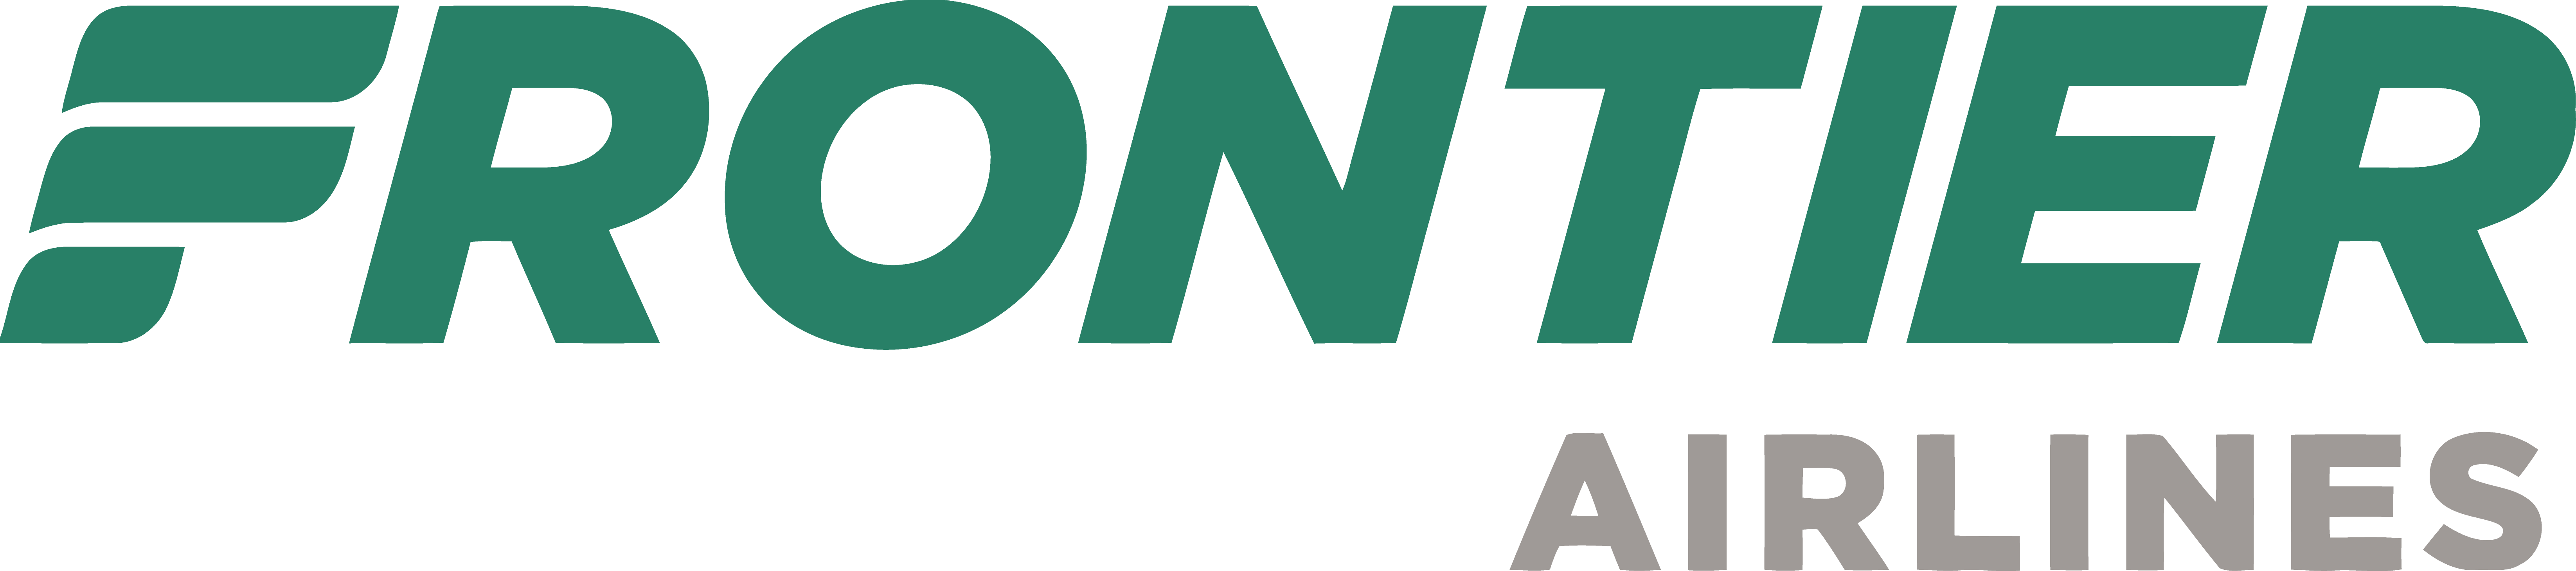 Frontier Airlines Logo PNG